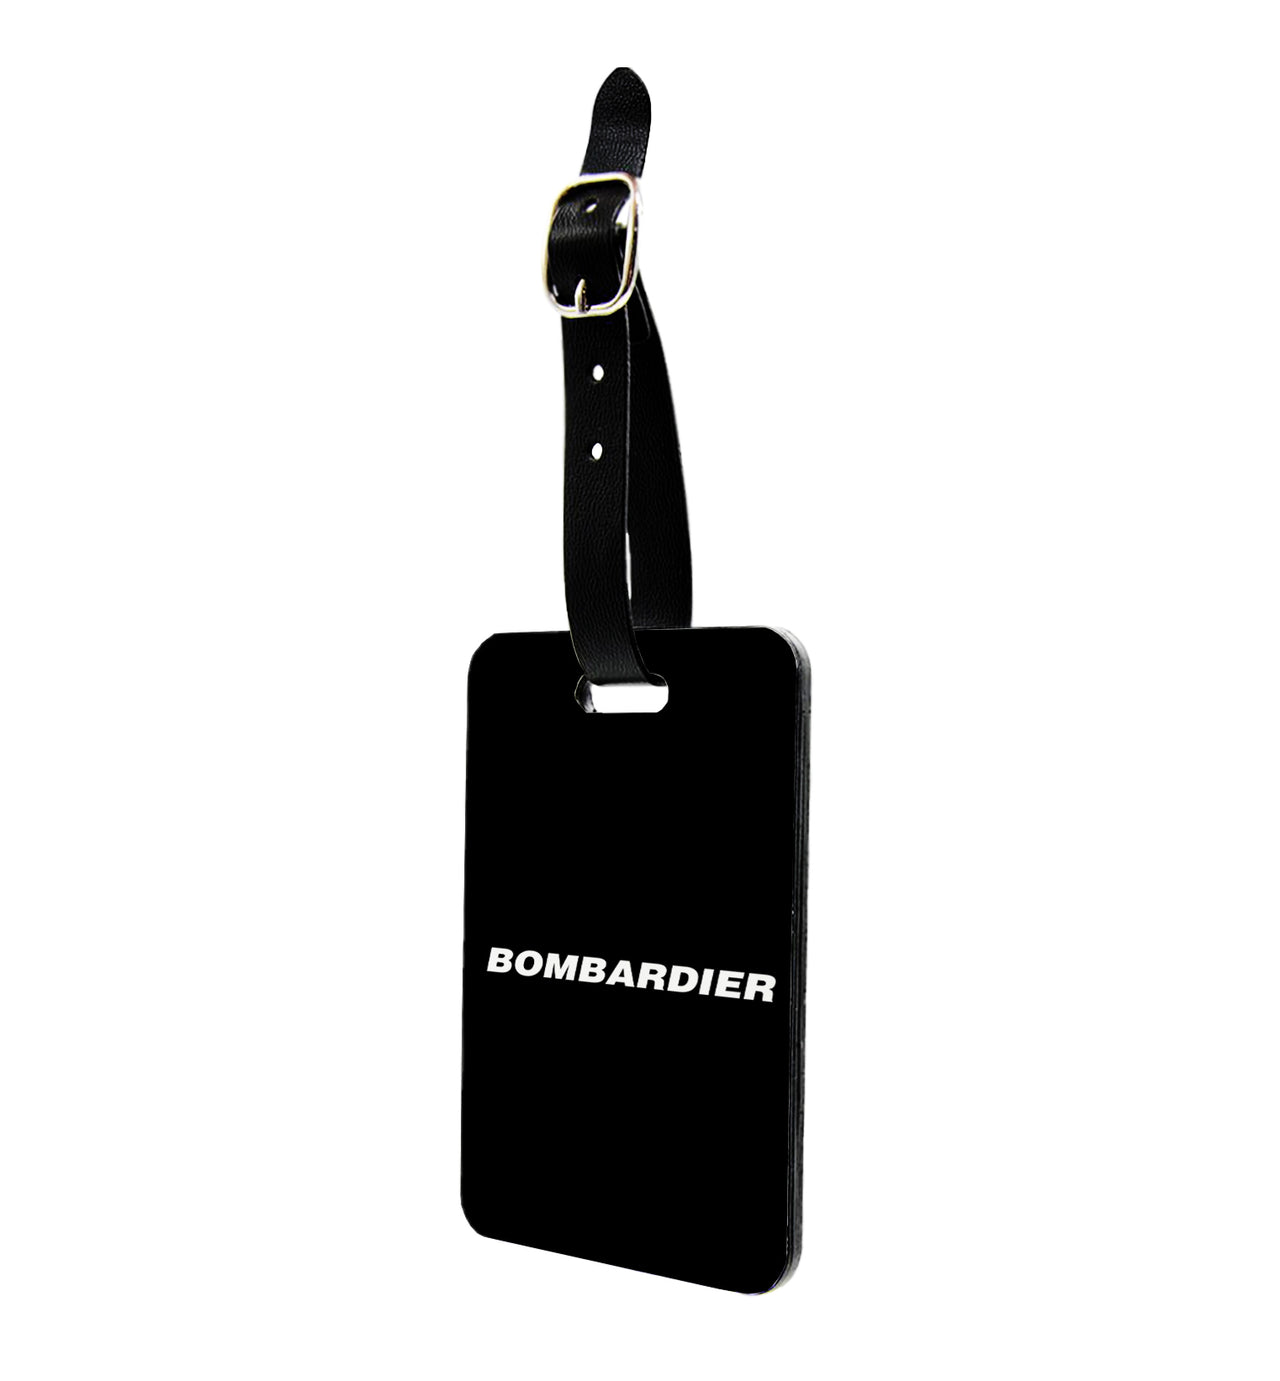 Bombardier & Text Designed Luggage Tag